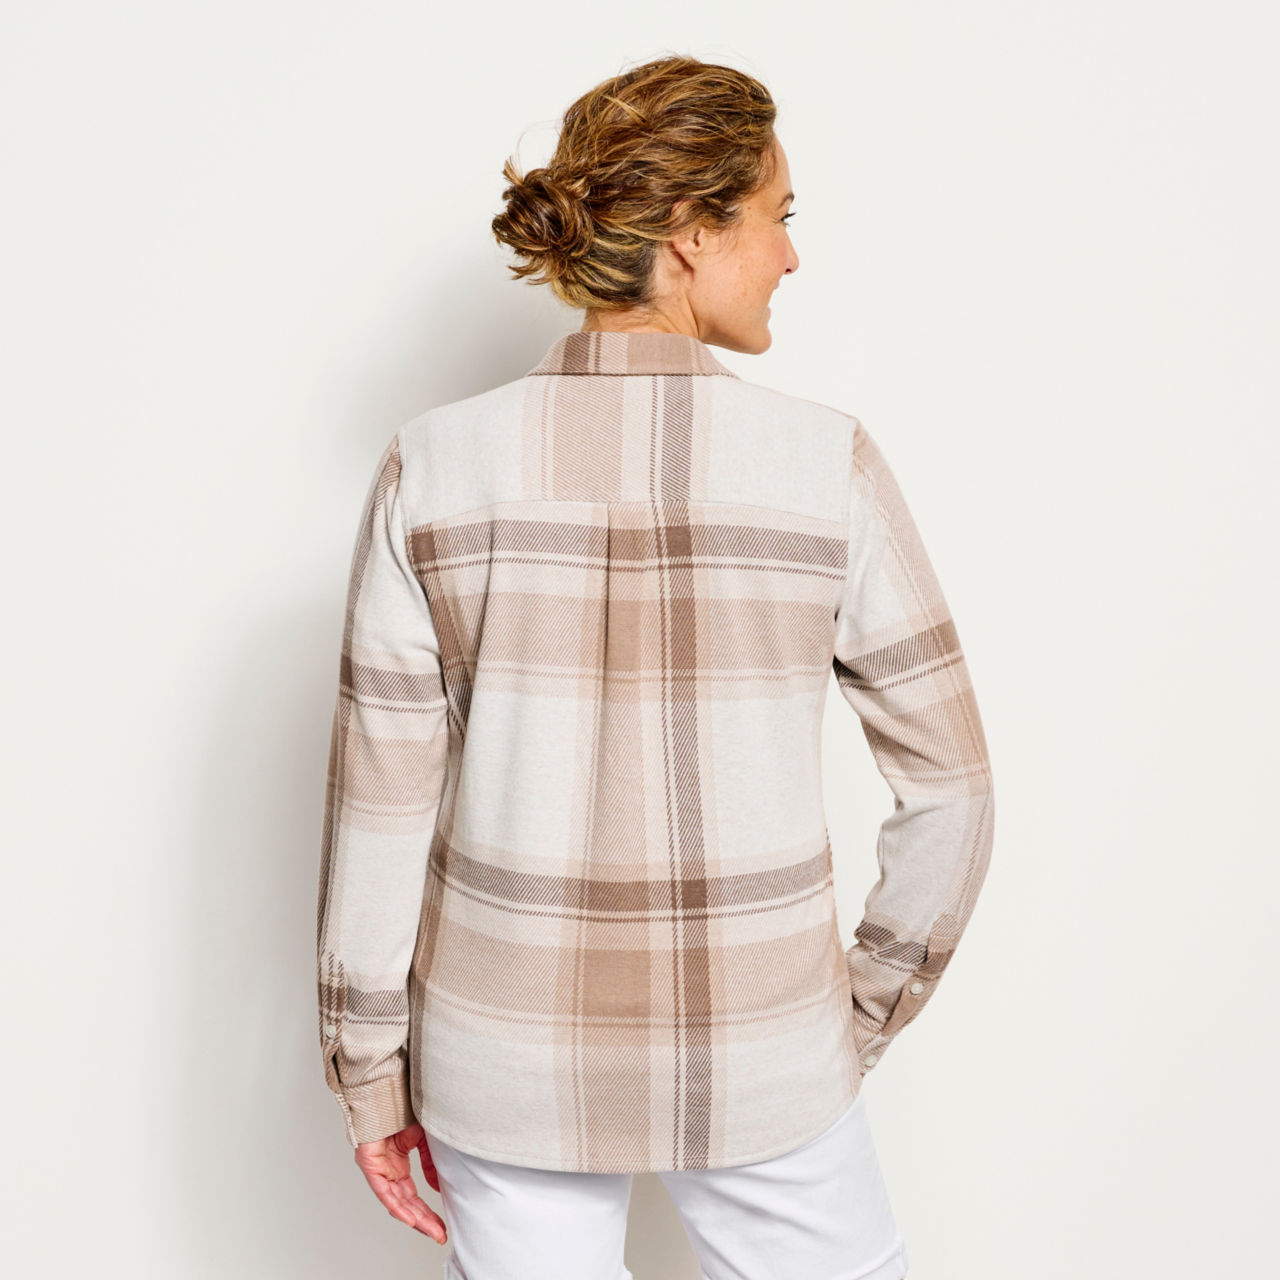 Women’s Snowy River Brushed Knit Long-Sleeved Shirt - SEA GLASS PLAID image number 5